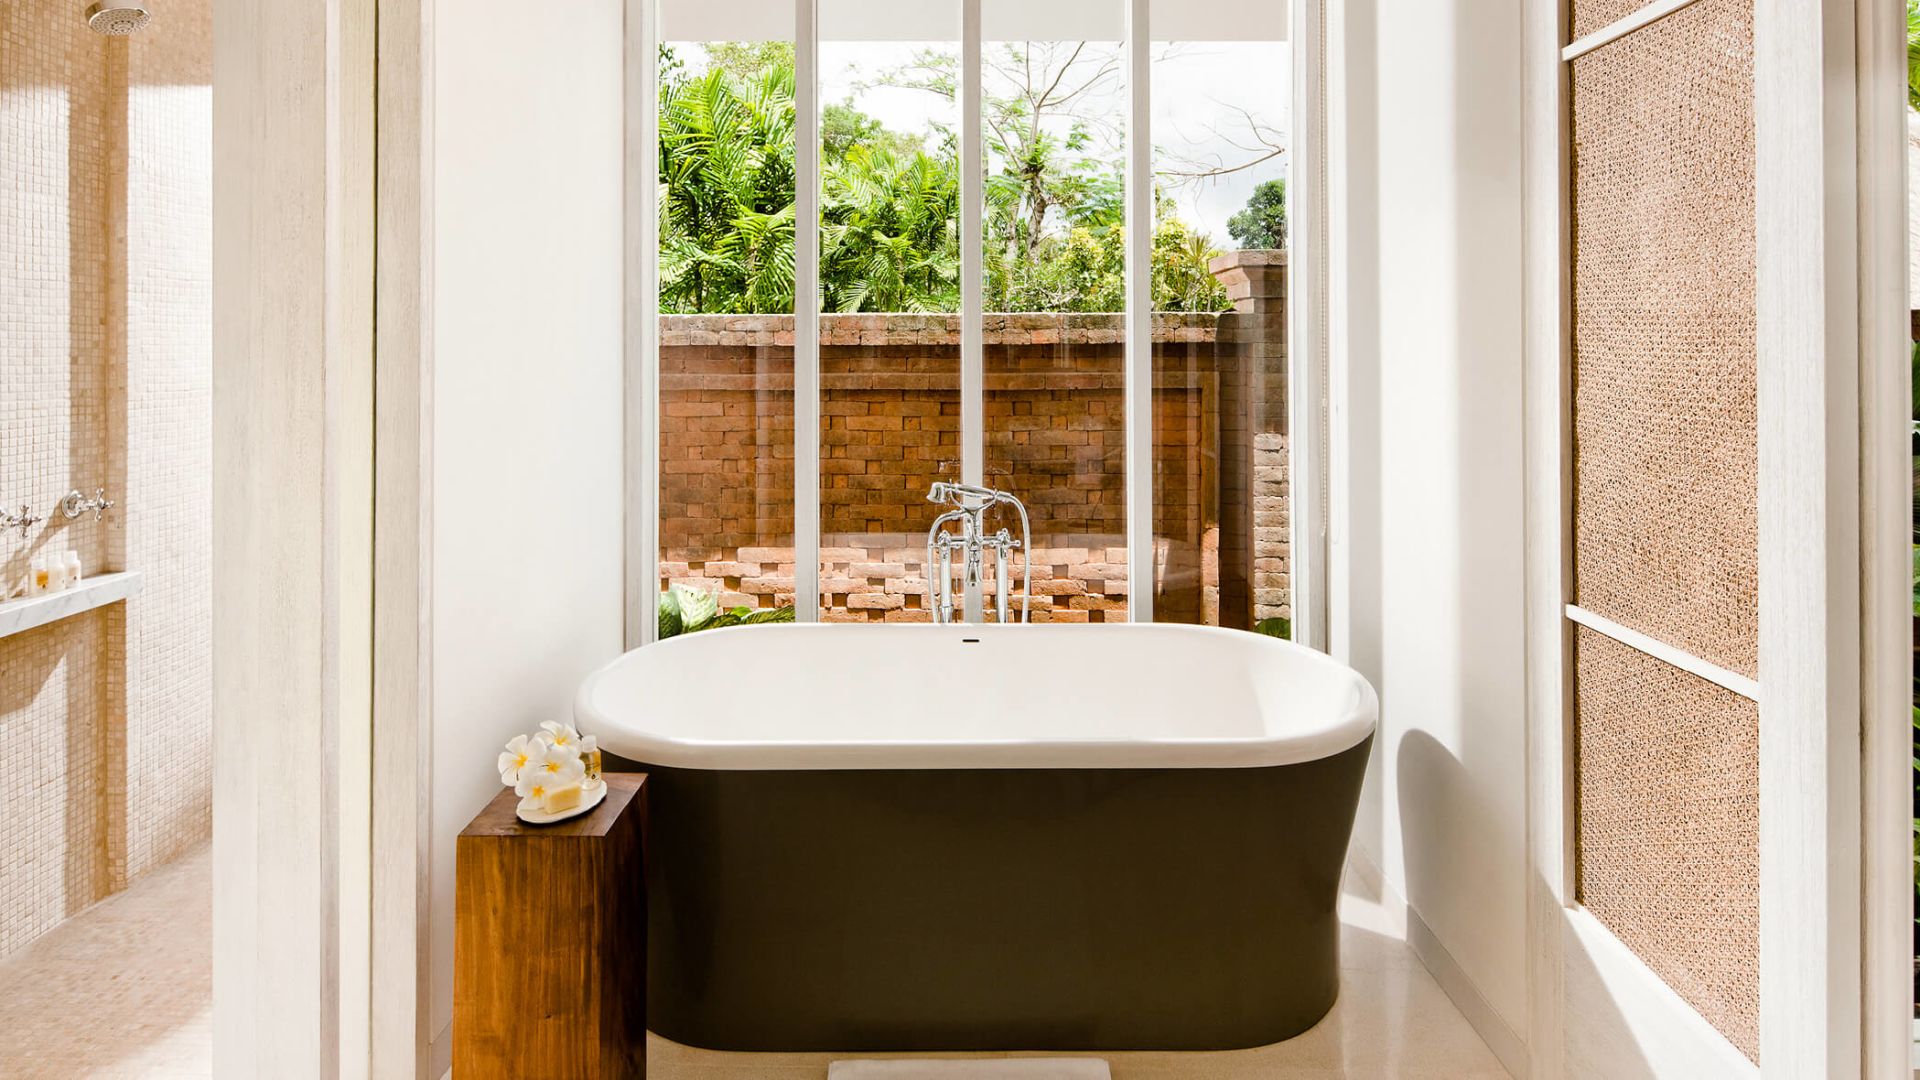 A Bathroom With A Large Window - Image